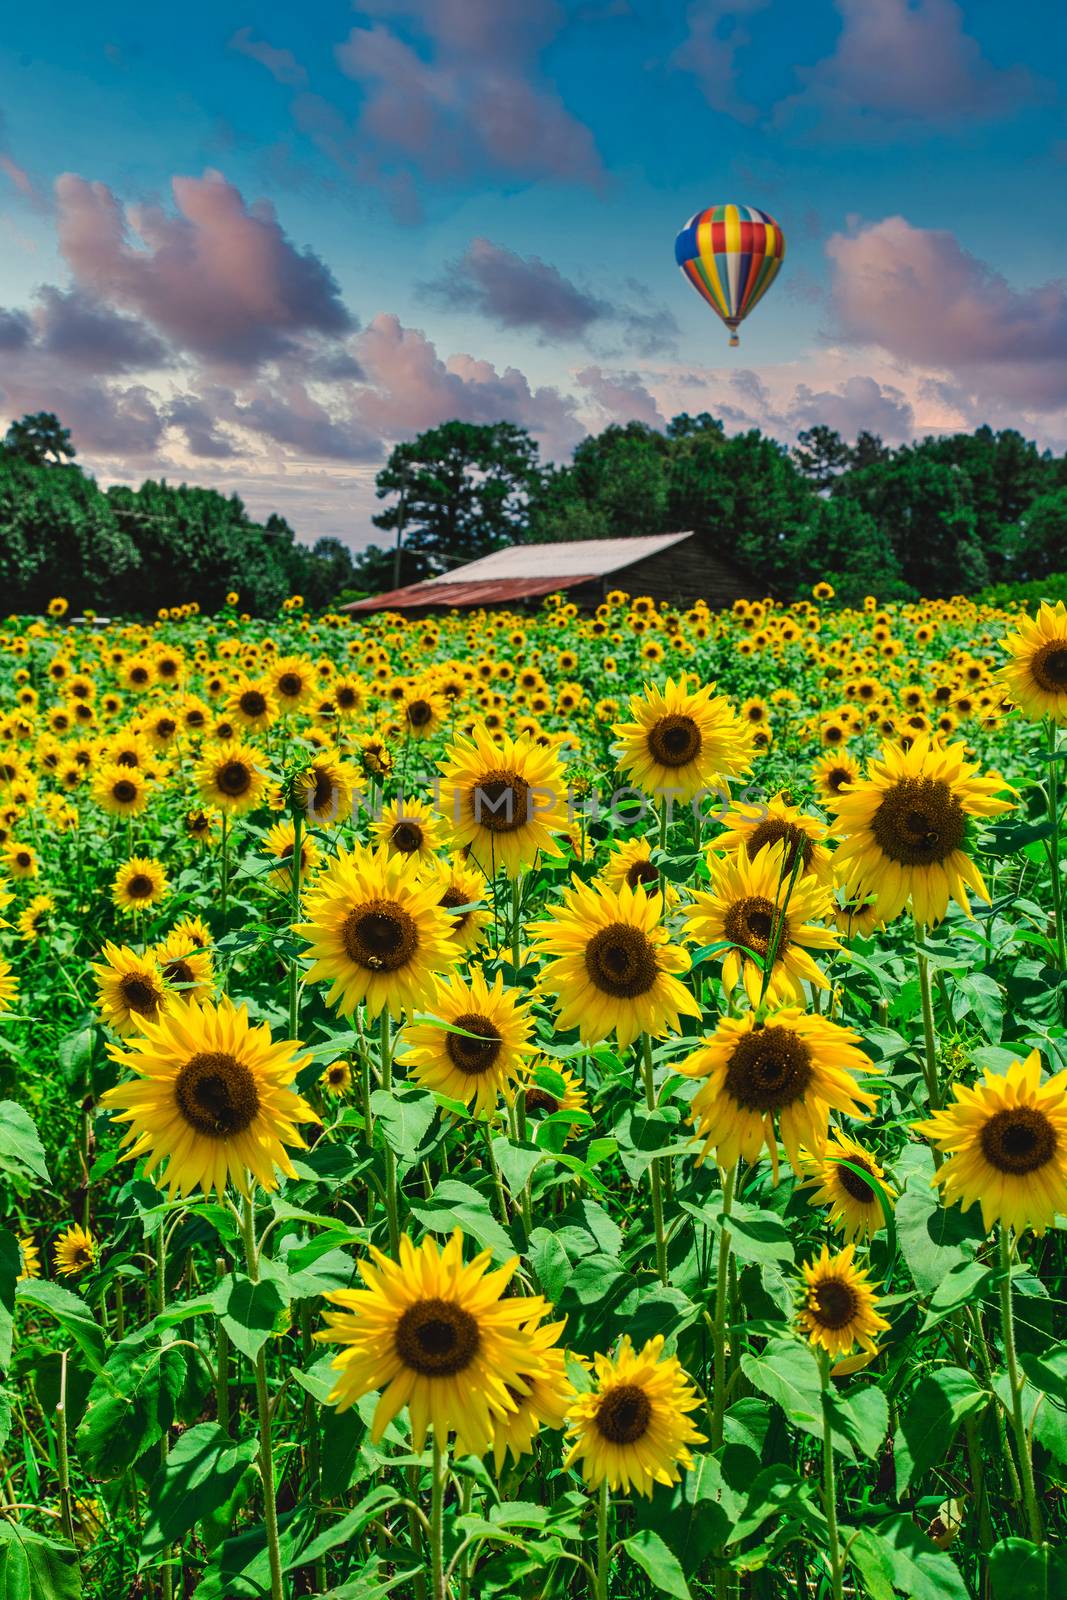 Field of Sunflowers with Barn and Balloon by dbvirago